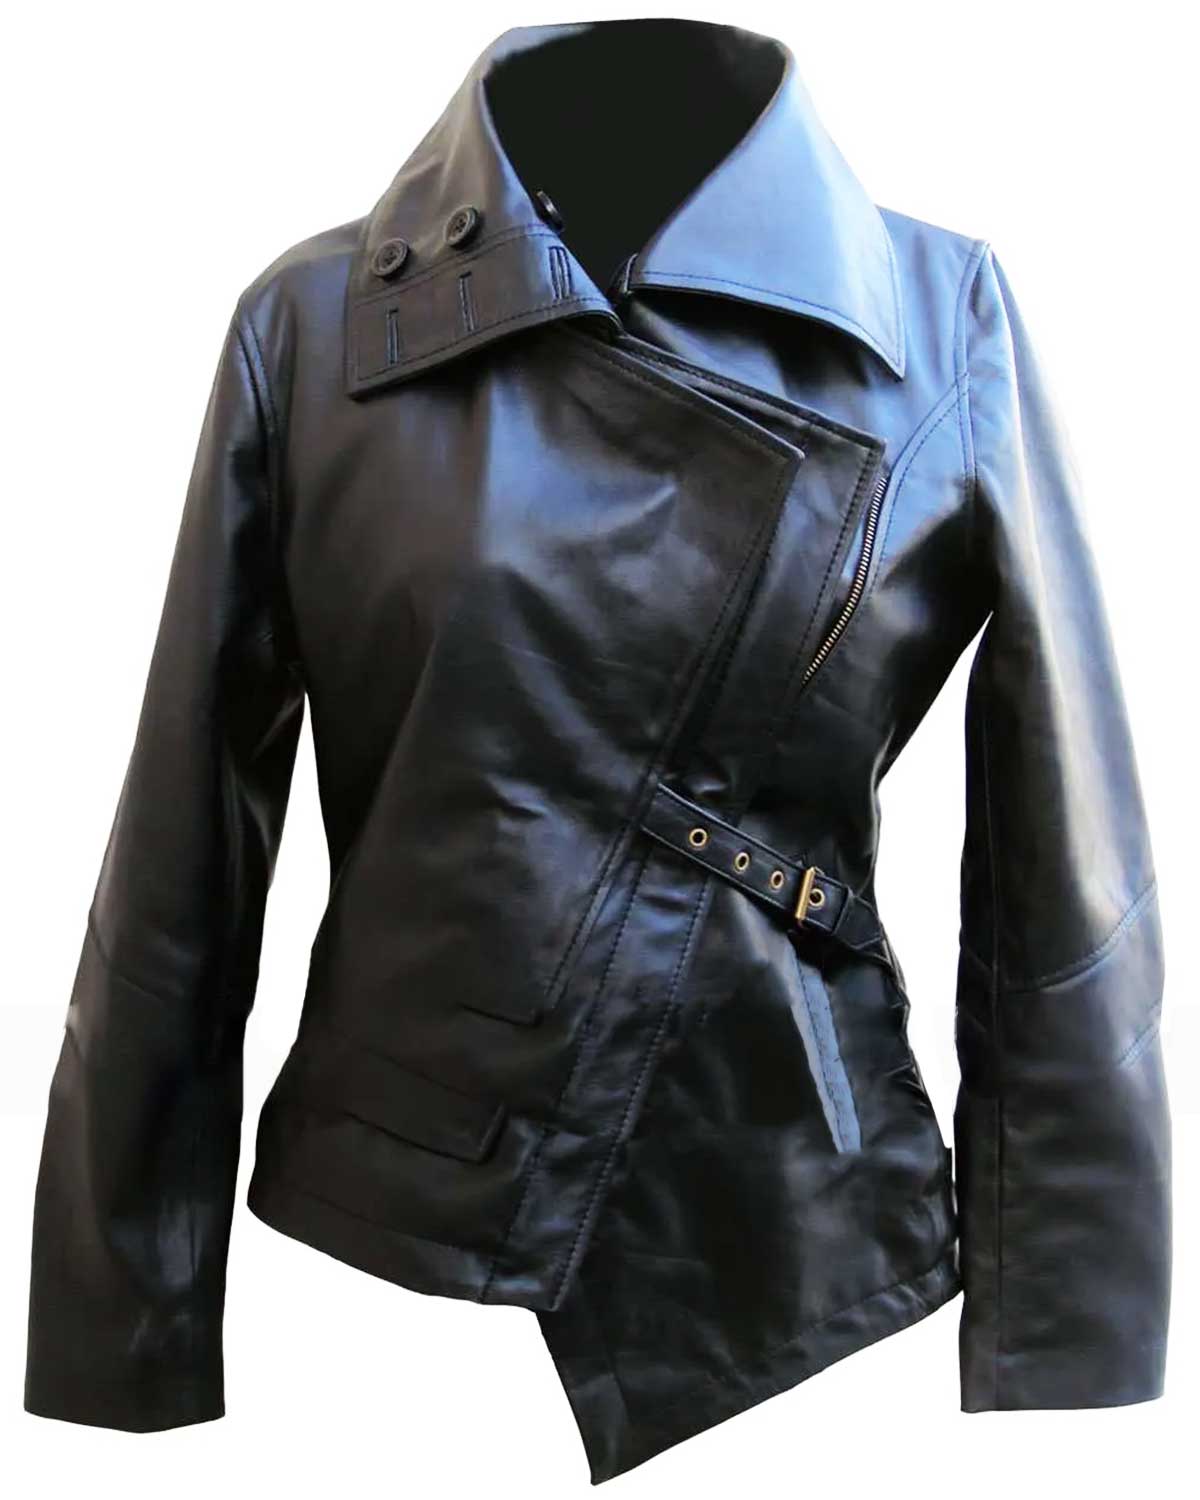 Elite Black The Hunger Games Catching Fire Leather Jacket